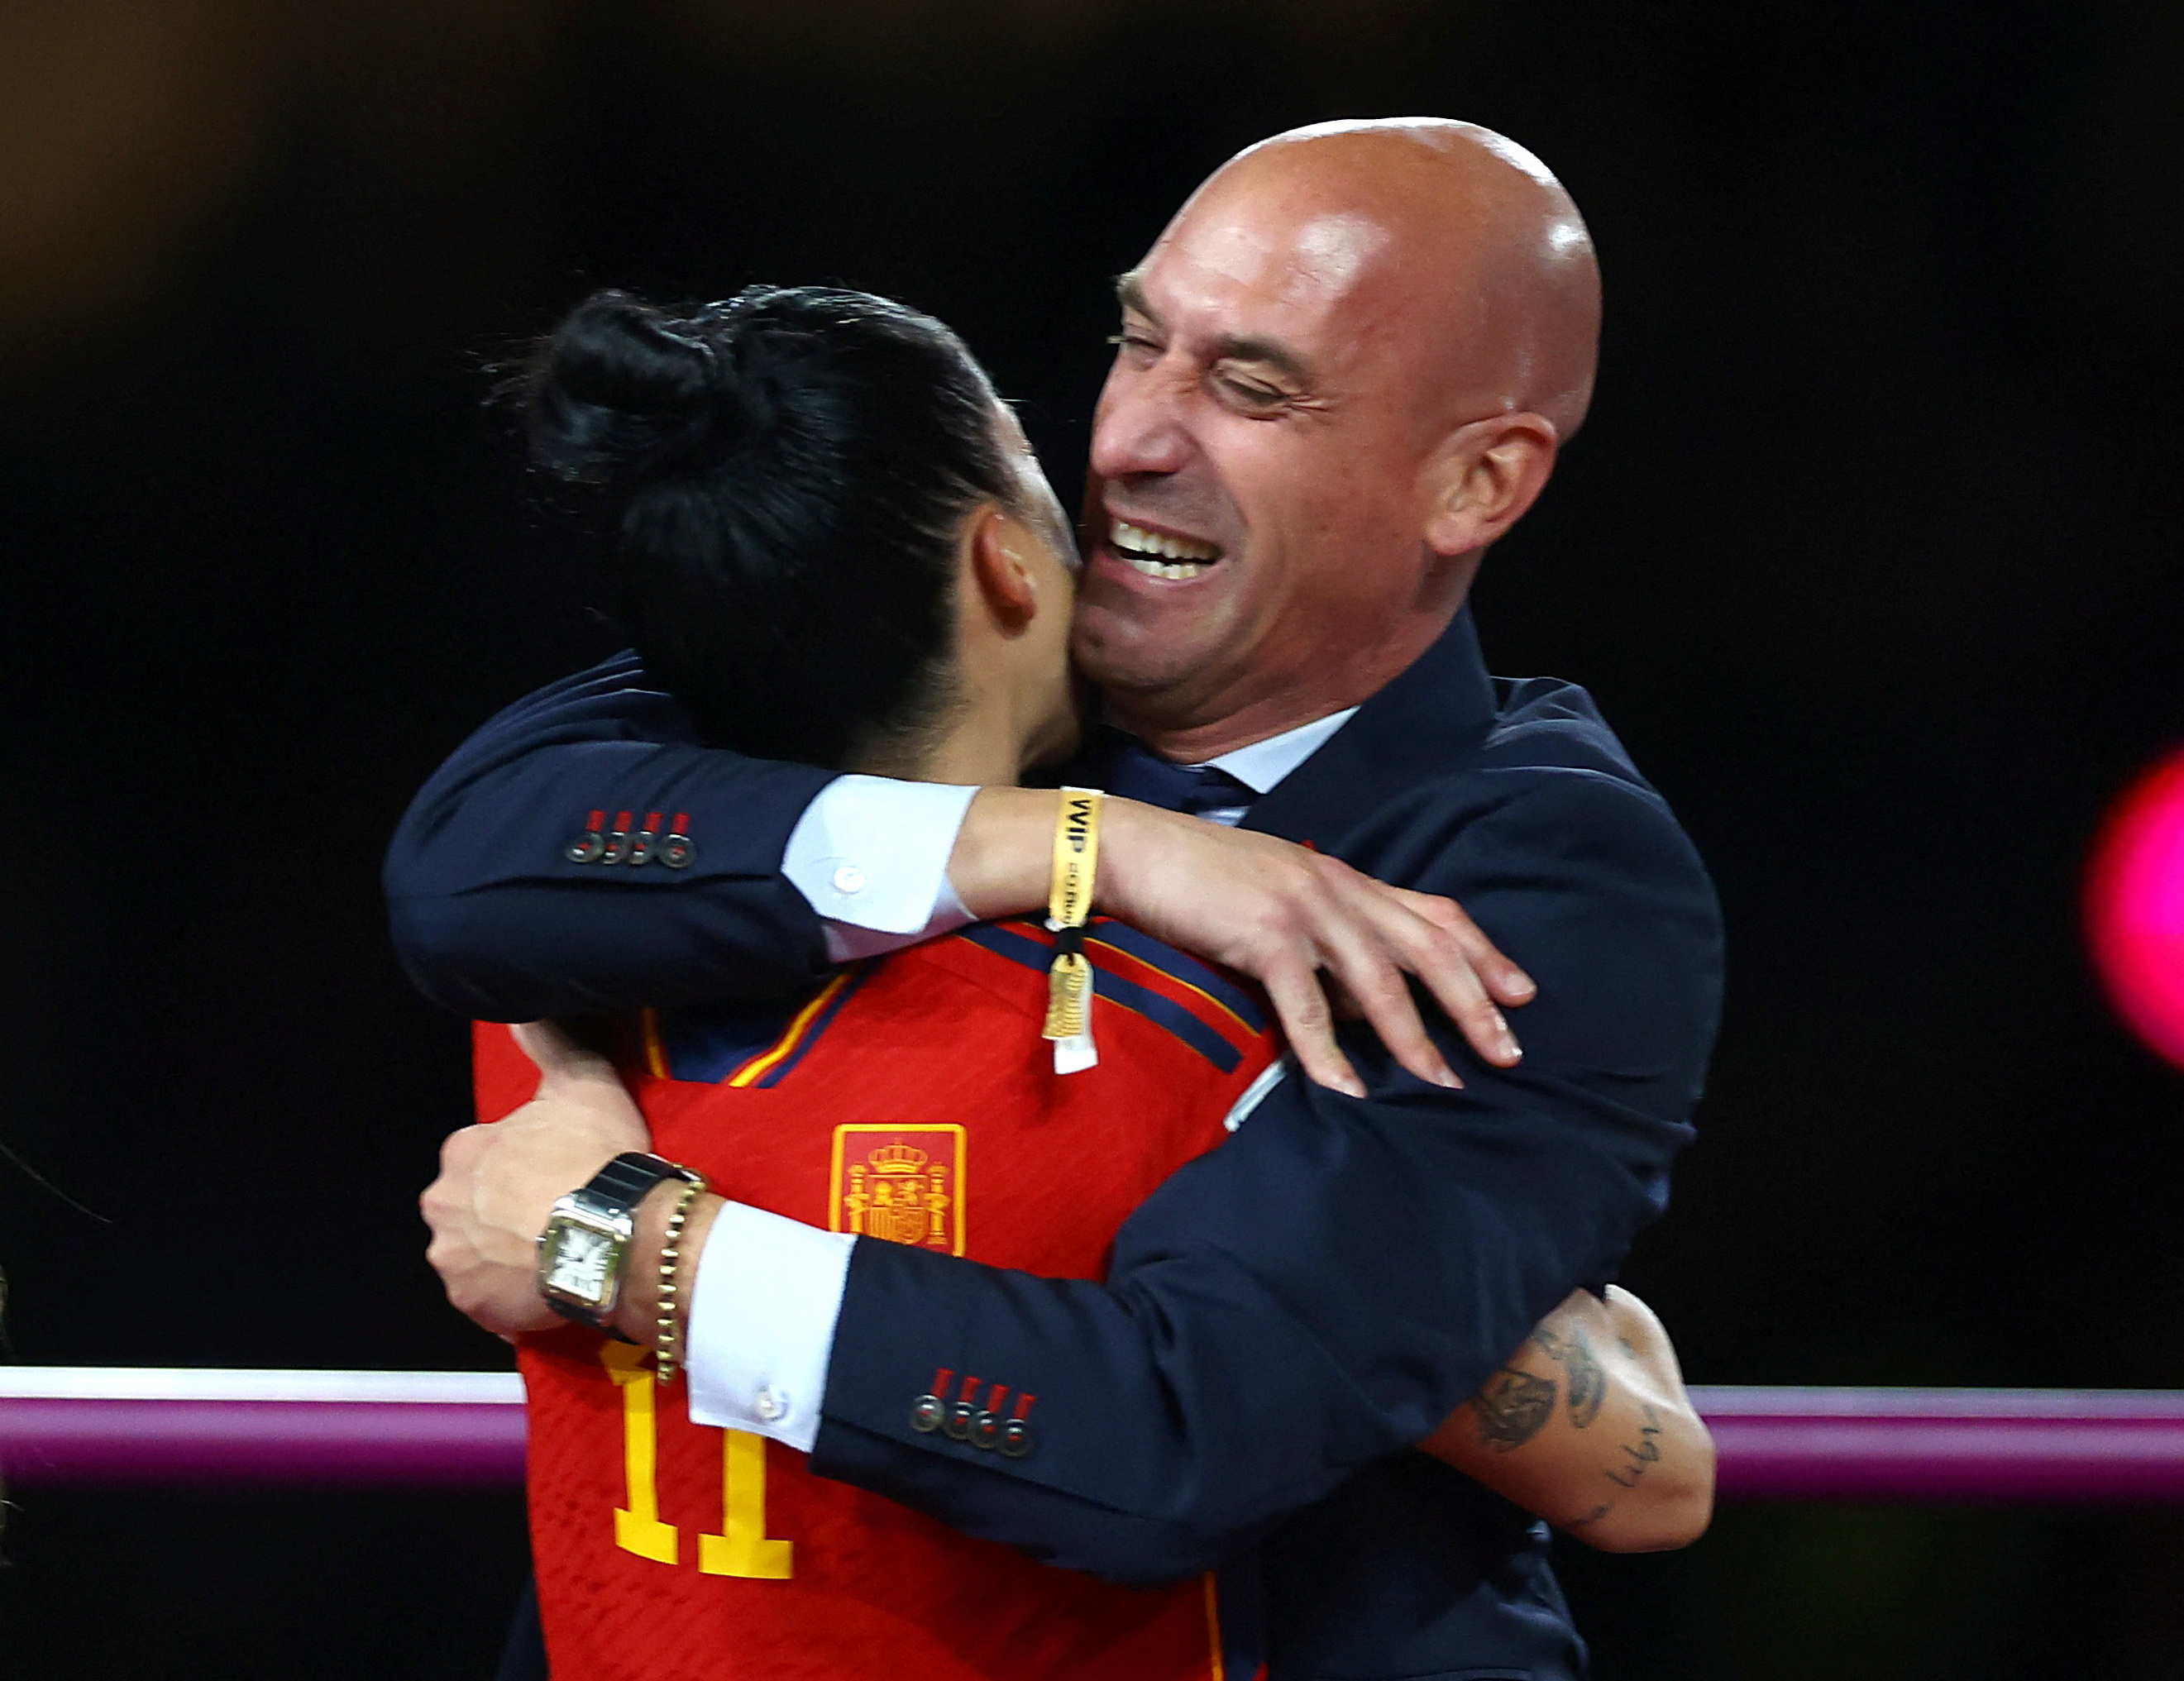 Federation president Luis Rubiales kissed Spain's Jennifer Hermoso after the match. /Hannah Mckay/Reuters